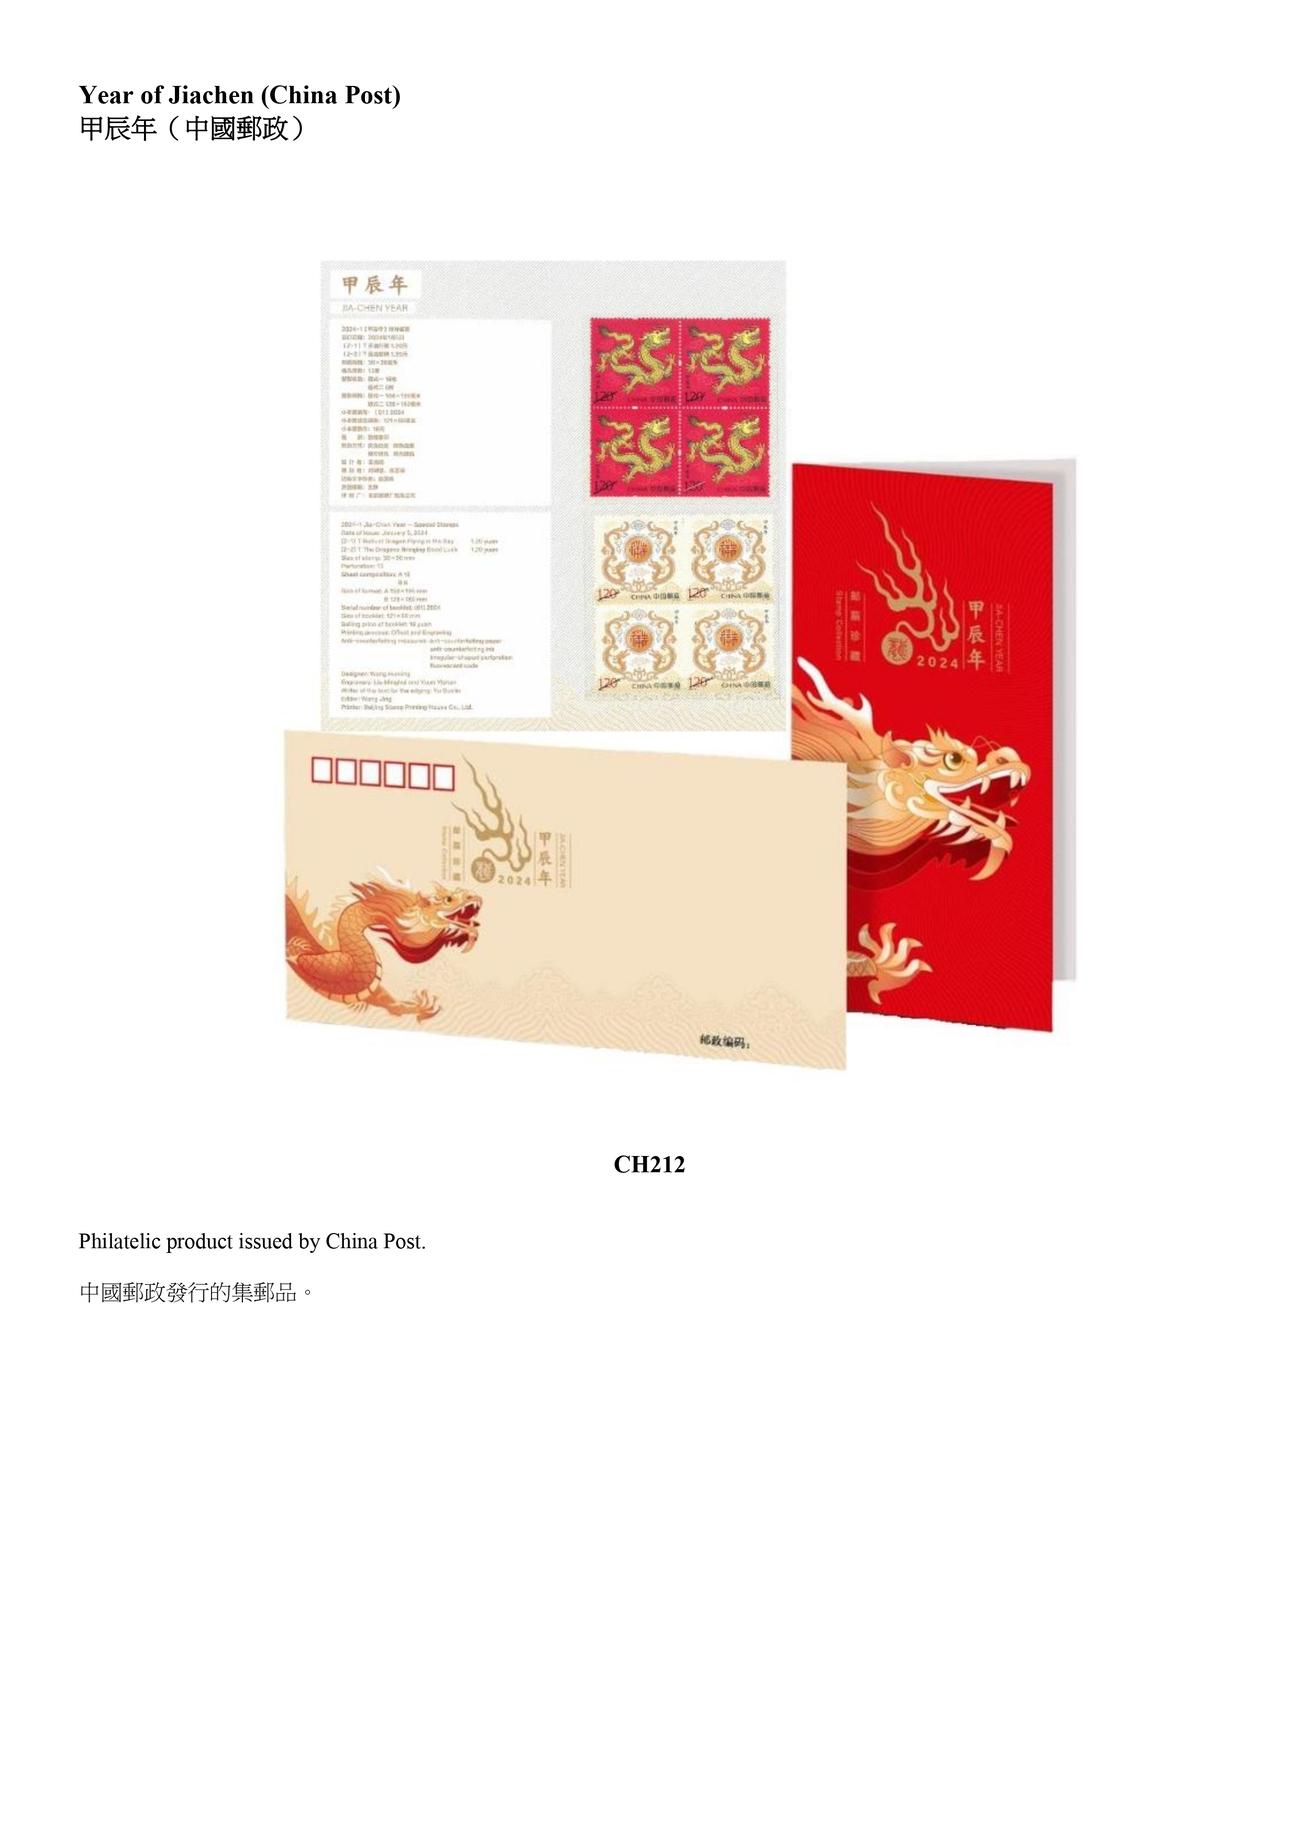 Hongkong Post announced today (April 29) that selected philatelic products issued by China Post, Macao Post and Telecommunications and the postal administrations of Australia, Isle of Man, Liechtenstein, New Zealand and the United Nations will be available for sale from tomorrow (April 30). Picture shows a philatelic product issued by China Post.